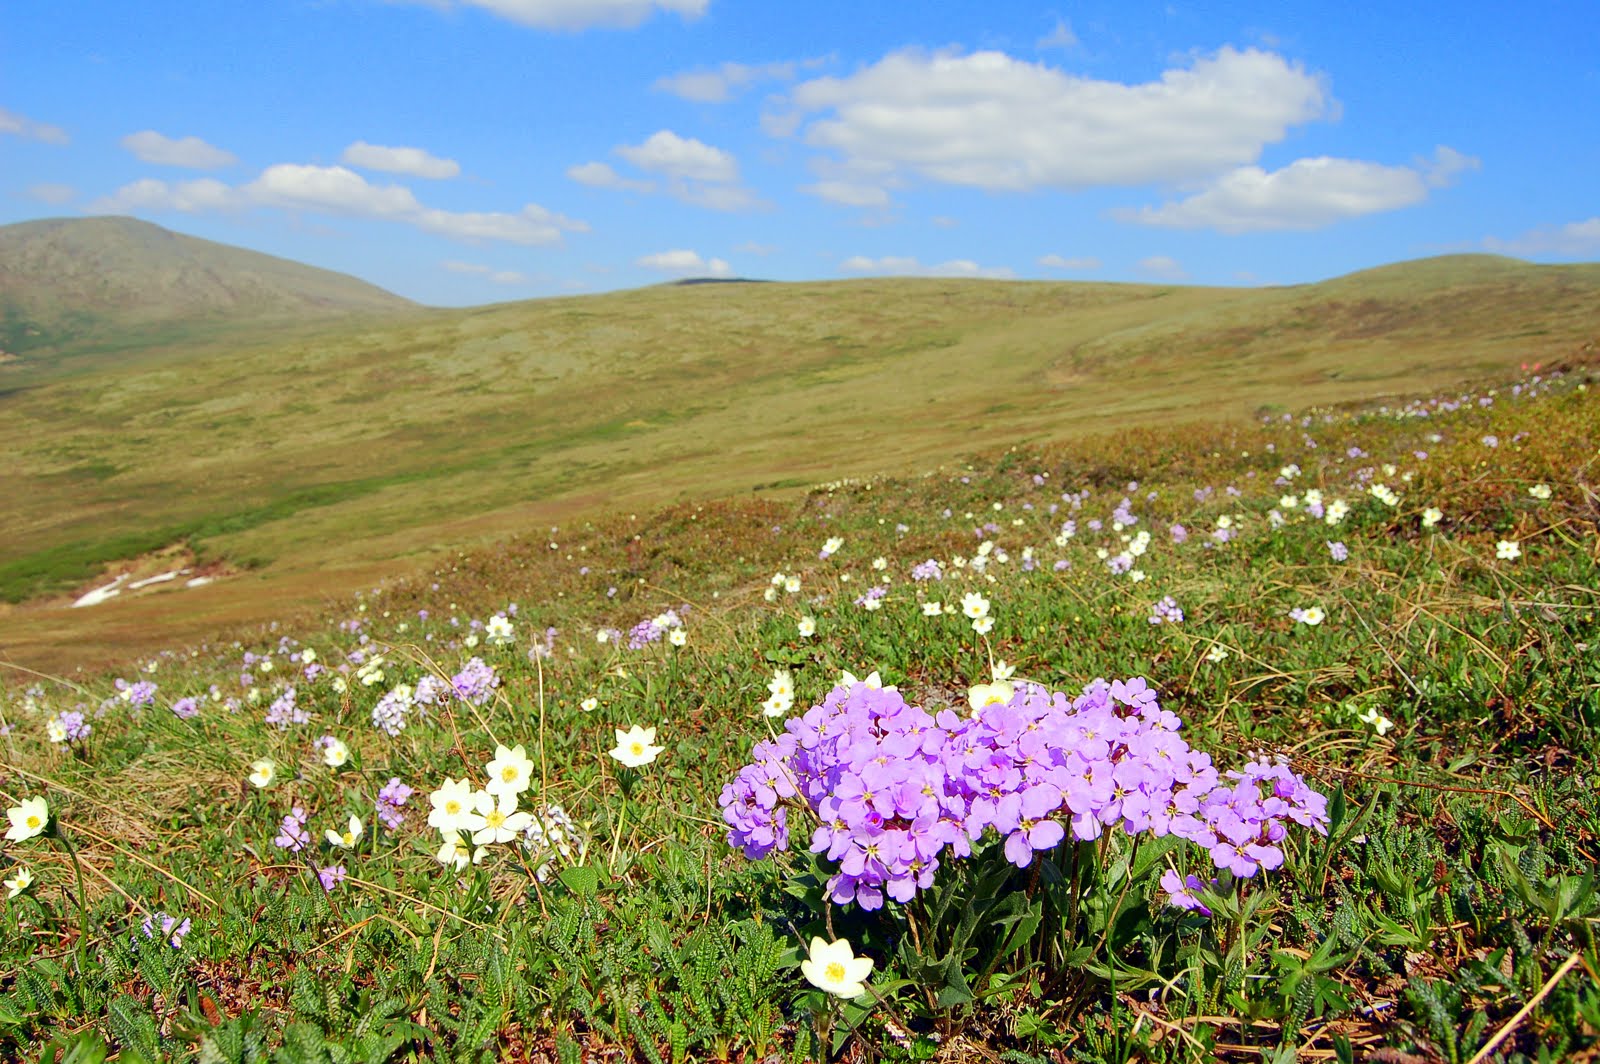 a meadow with purple Parrya nudicaulis flowers mixed with other yellow flowers